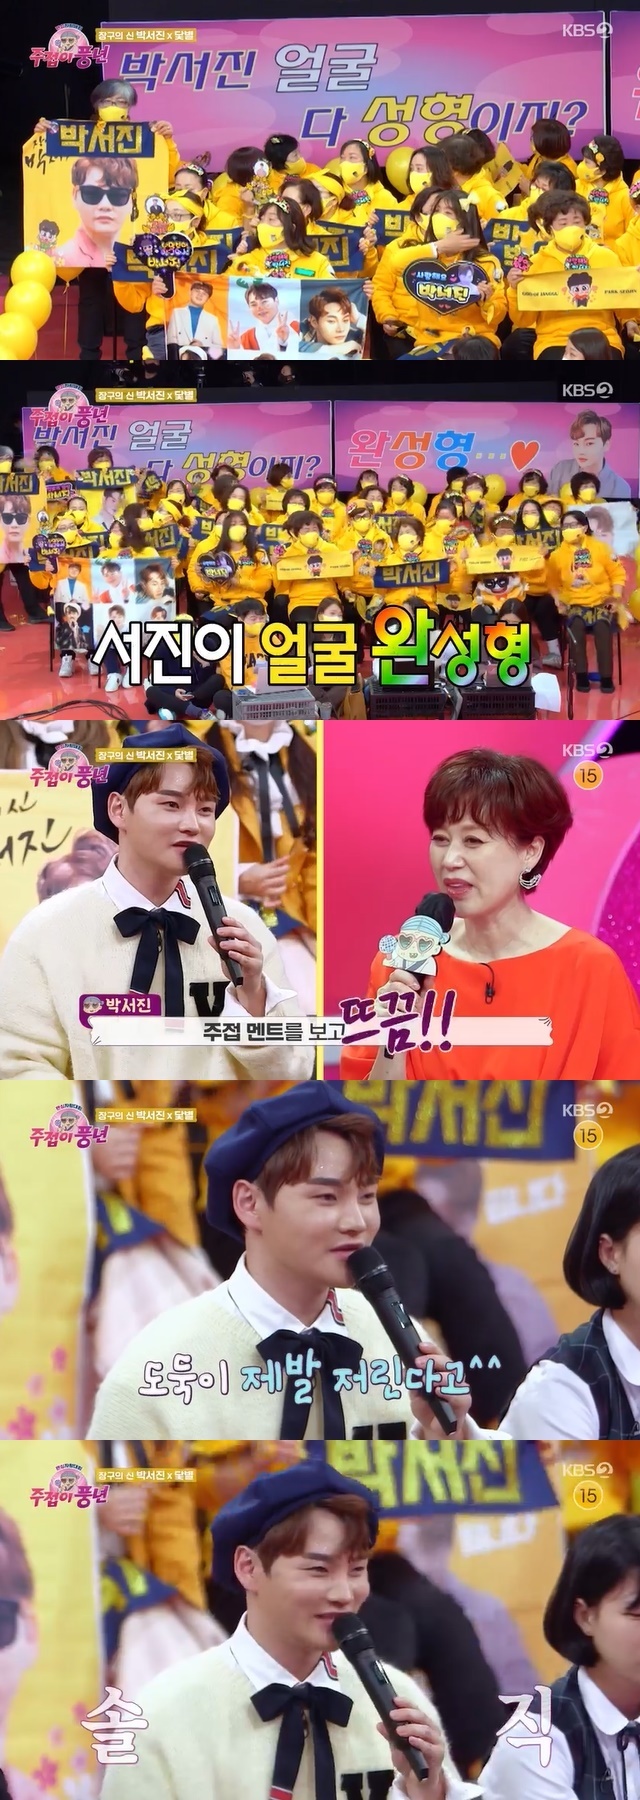 Janggus god Park Seo-jin showed a candid reaction to the molding.In the 7th KBS 2TV entertainment Fan heart show (hereinafter referred to as a good harvest) broadcast on March 17, Singer Park Seo-jin and his official fan cafe Anchor Star appeared as the main group.On the day, Park Mi-sun caught all the bakseojin face moldings? of the various main re-Ments of the main group, which led to the word complete molding.Park Mi-sun asked Park Seo-jin, Do you like Re-Ment? Park Seo-jin said, I was hot when I saw the Re-Ment.The thief is please, he said, doing a frank Re-Ment and said, I will do it here. 